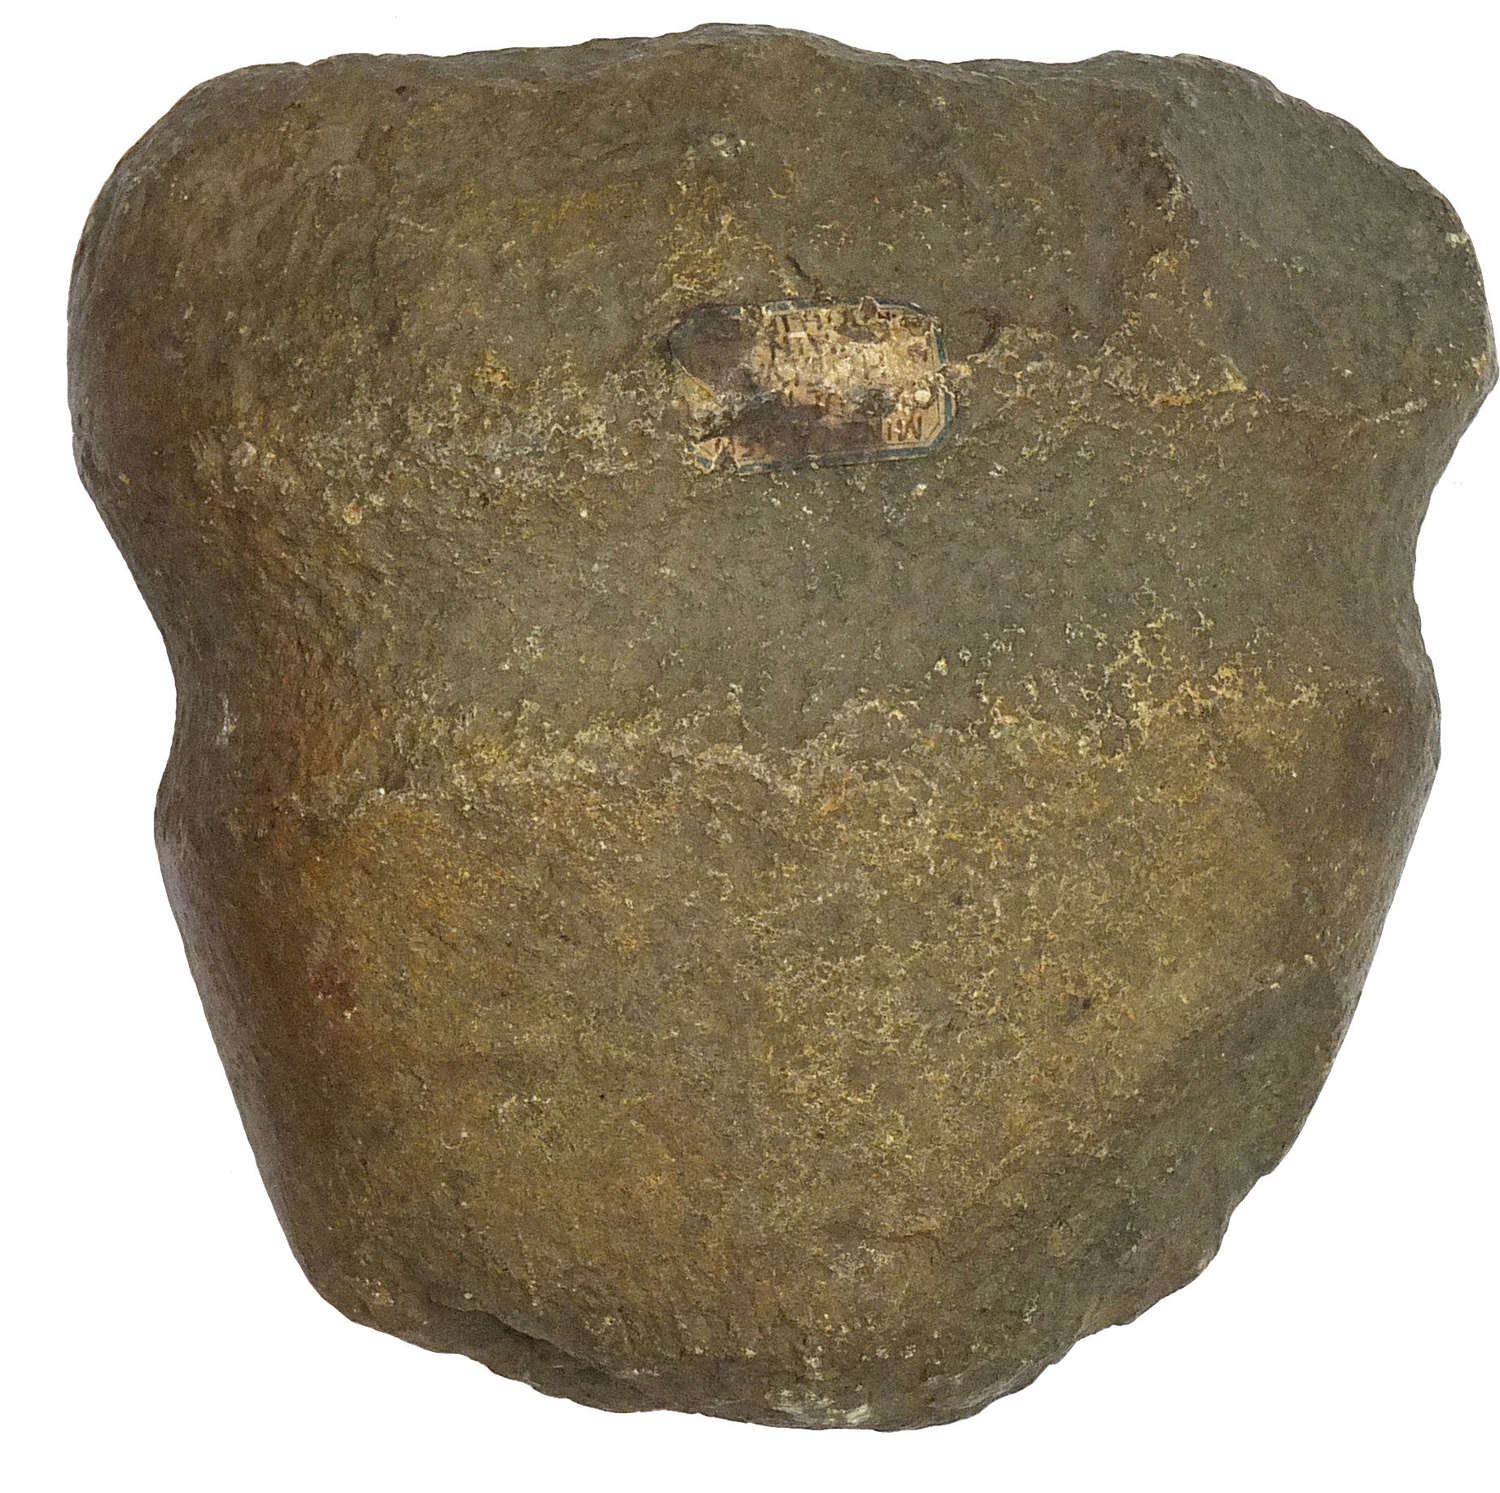 A grooved stone axe hammer presented to J.A. Phillips, F.R.S. in 1885